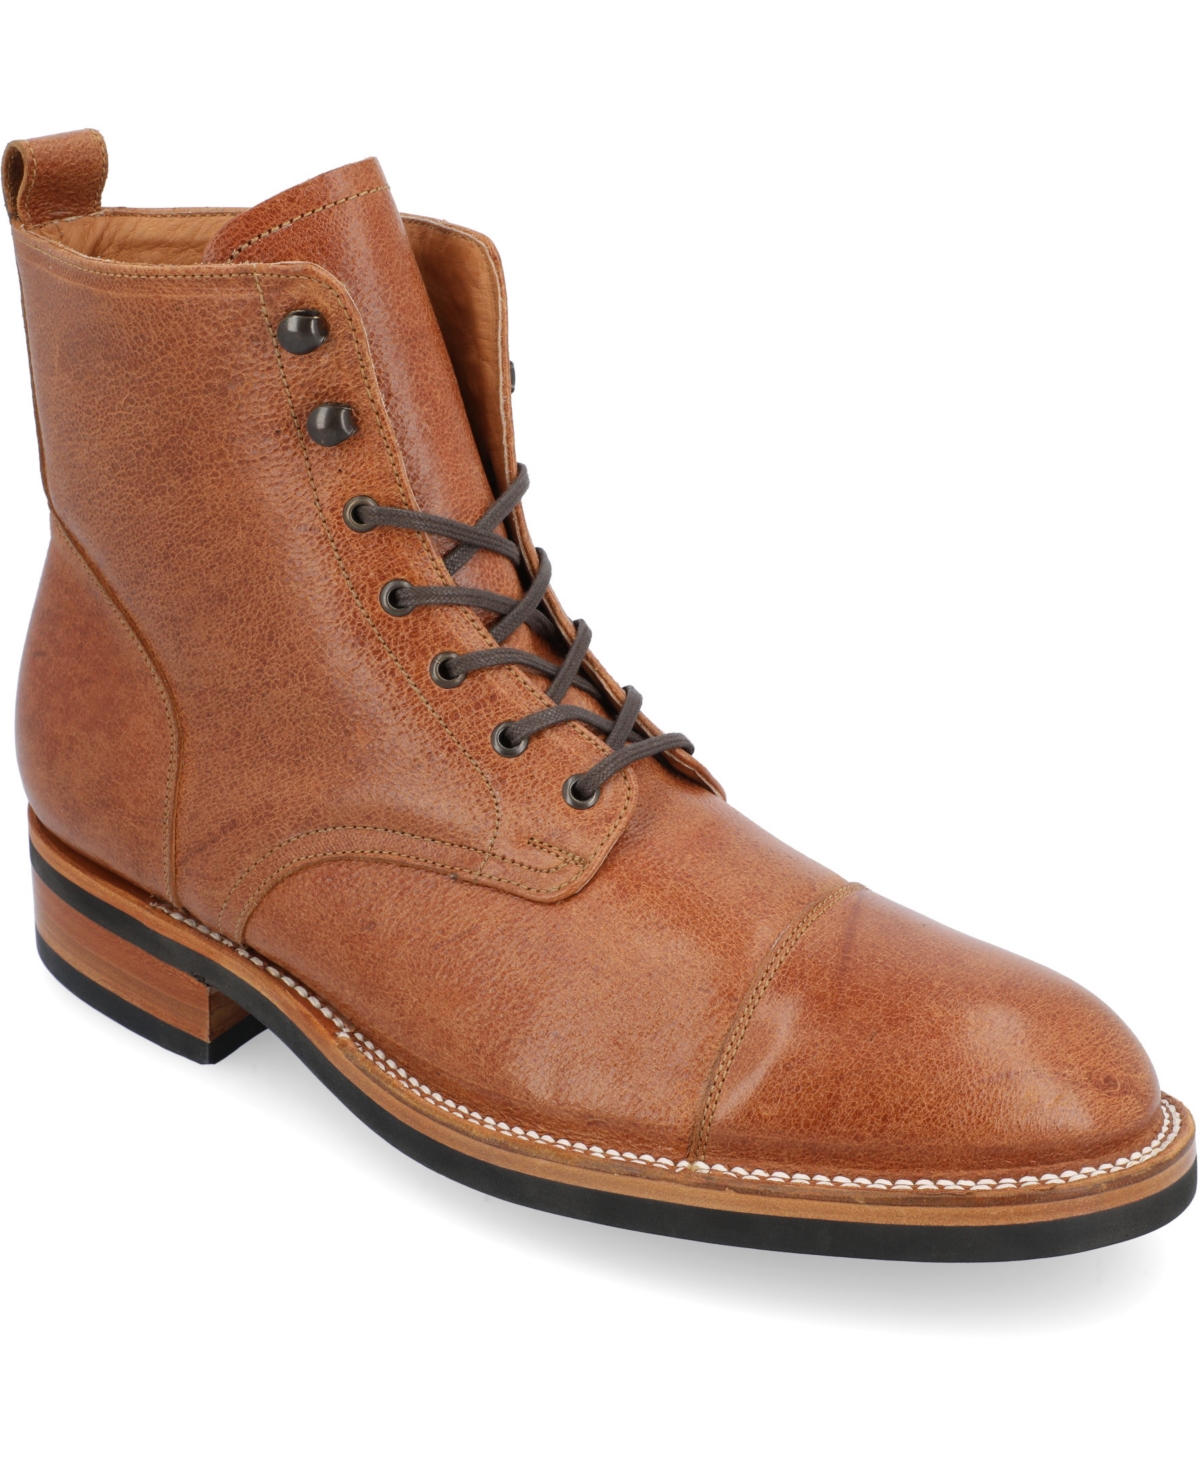 Men's Legacy Lace-up Rugged Stitchdown Cap-Toe Boot - Nutmeg